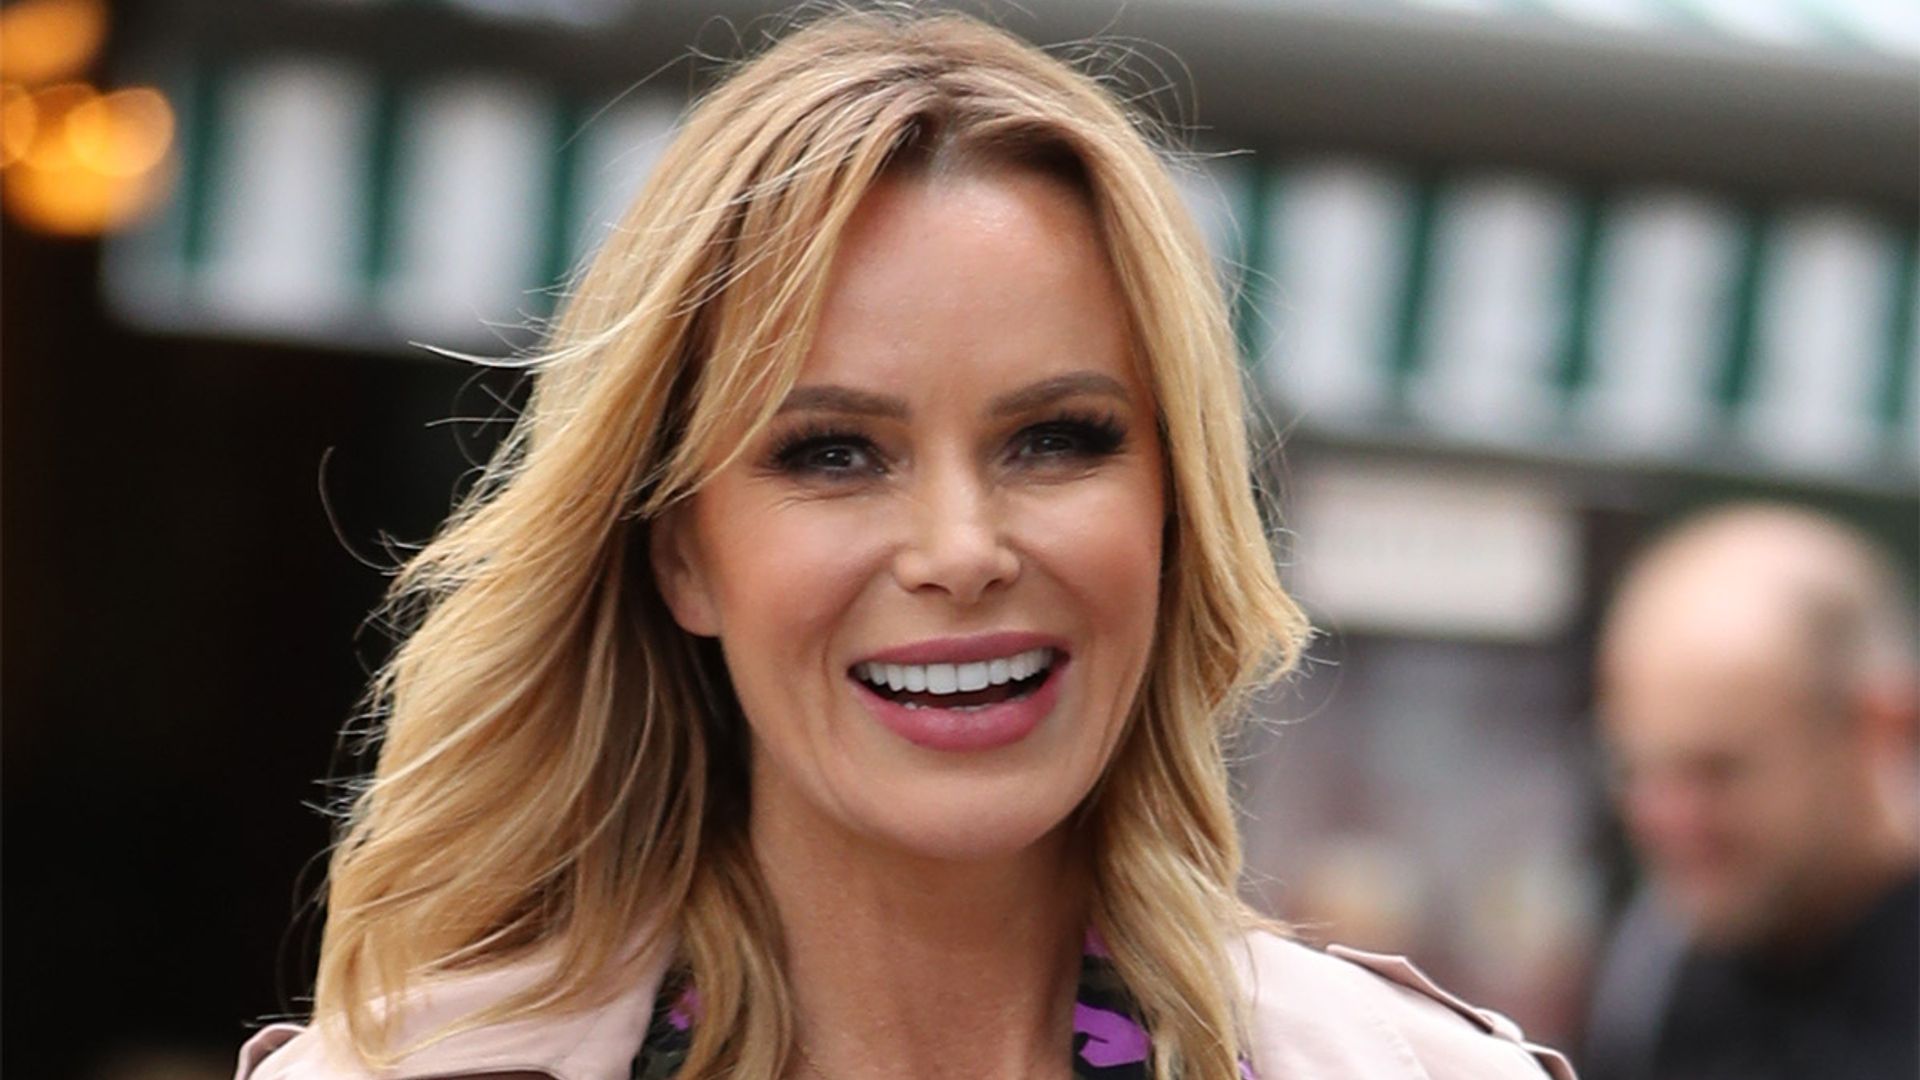 Amanda Holden News, Articles, Stories & Trends for Today